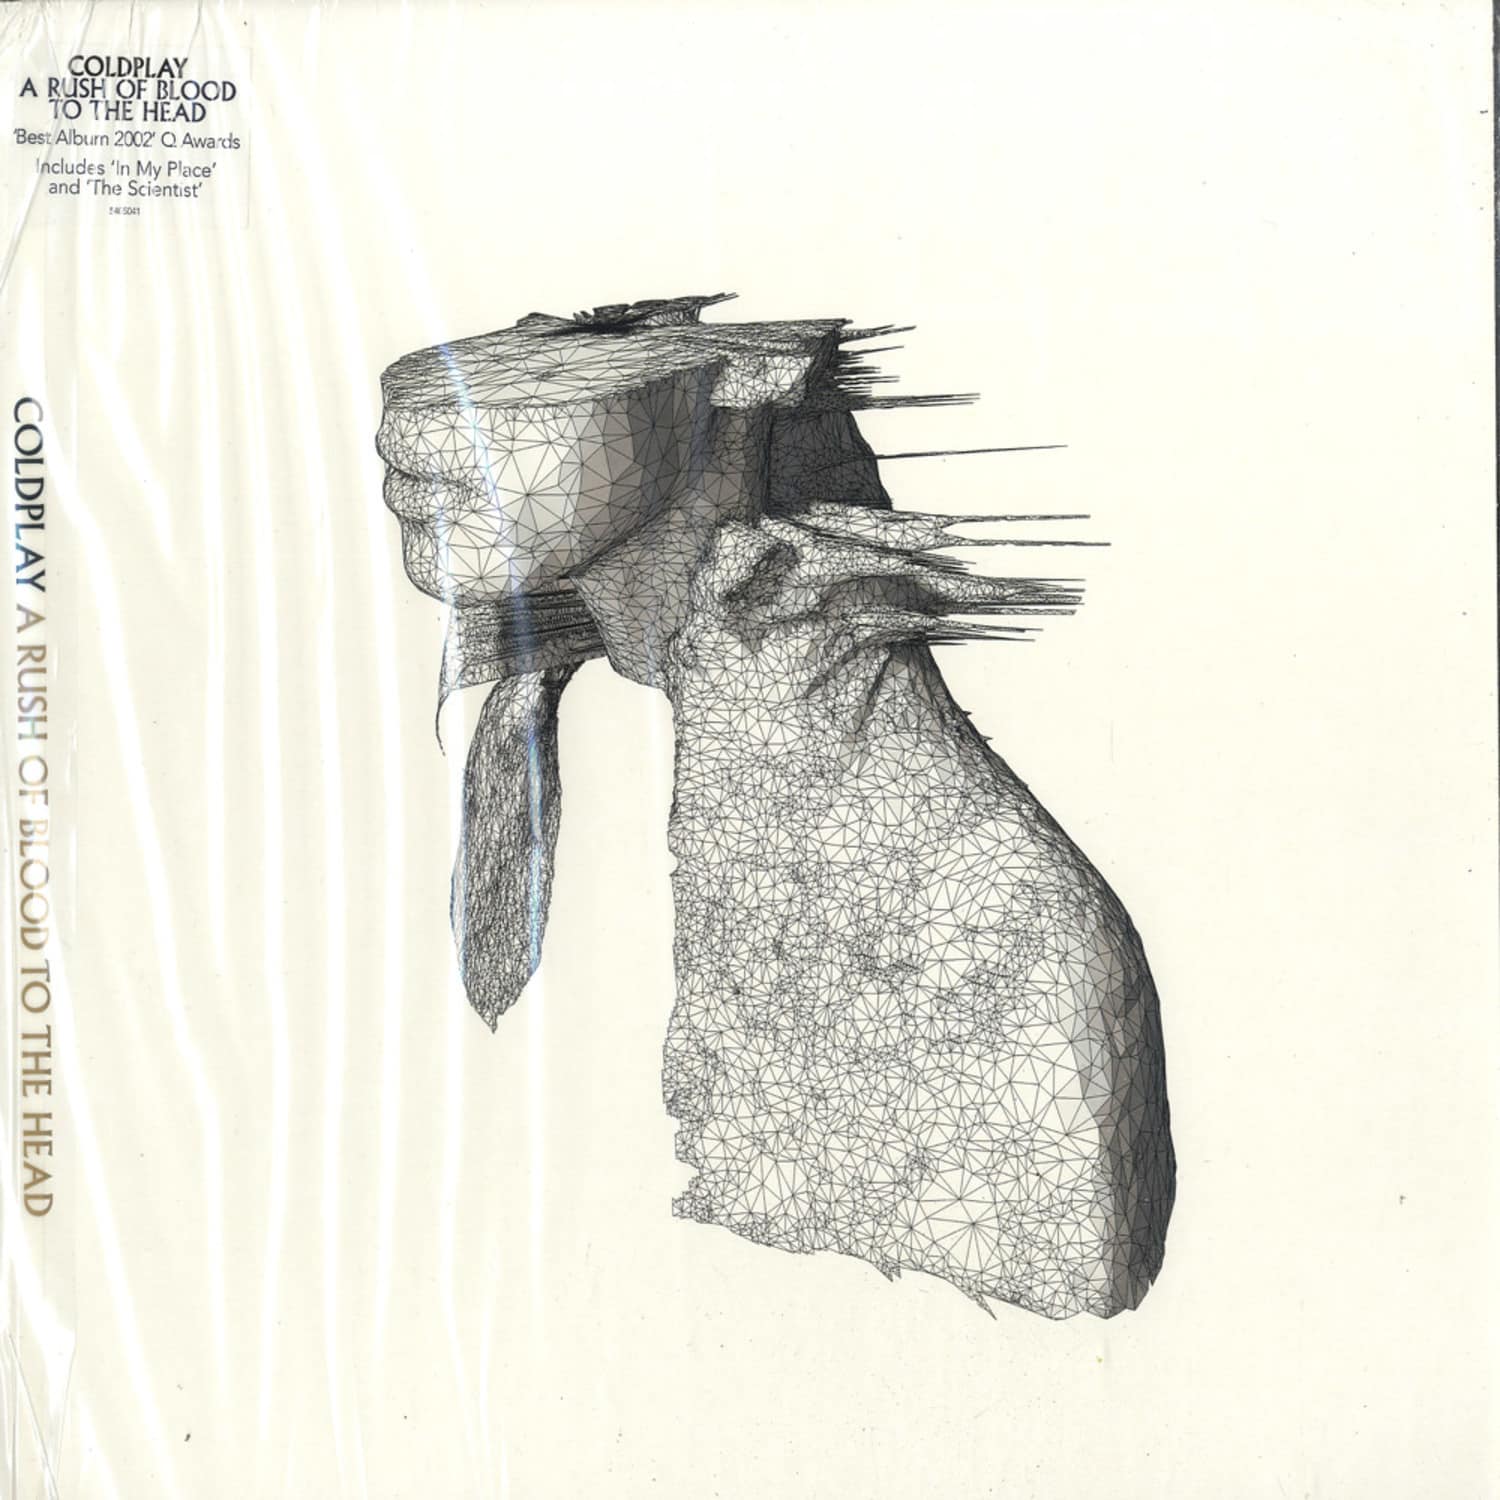 Coldplay - A RUSH OF BLOOD TO THE HEAD 